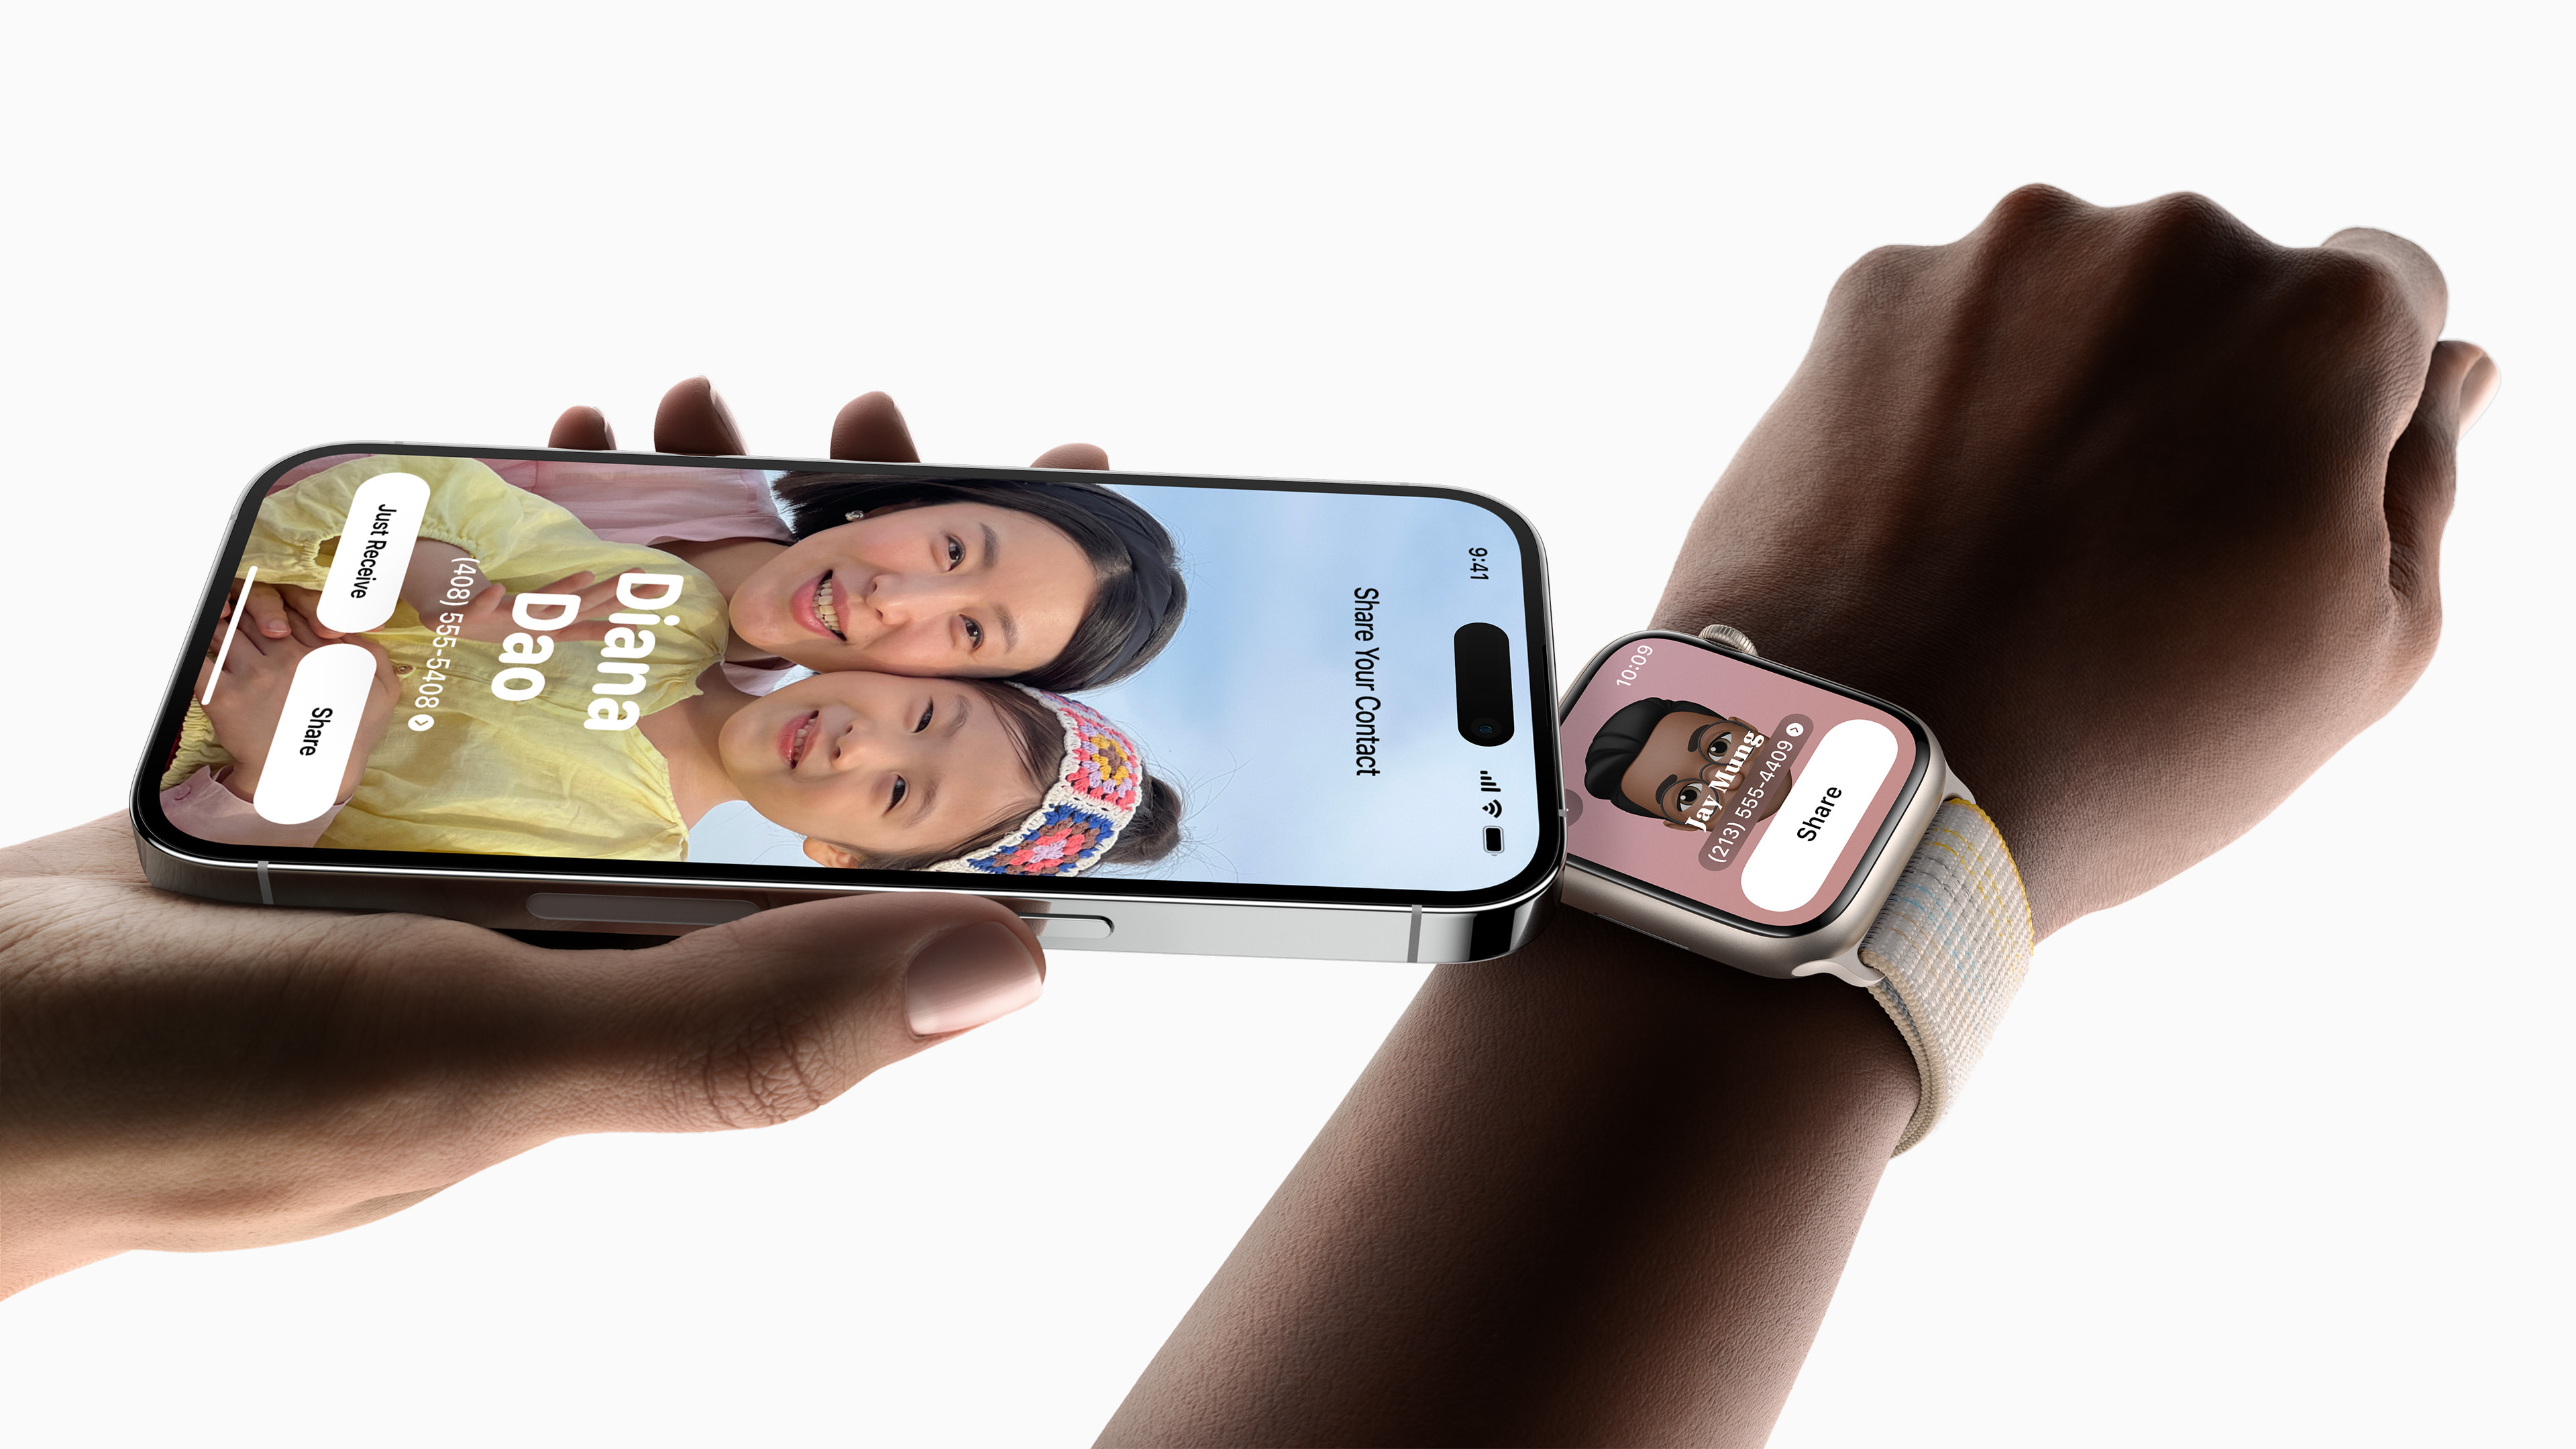 The Apple Watch on someone's wrist next to an iPhone in someone's hand.